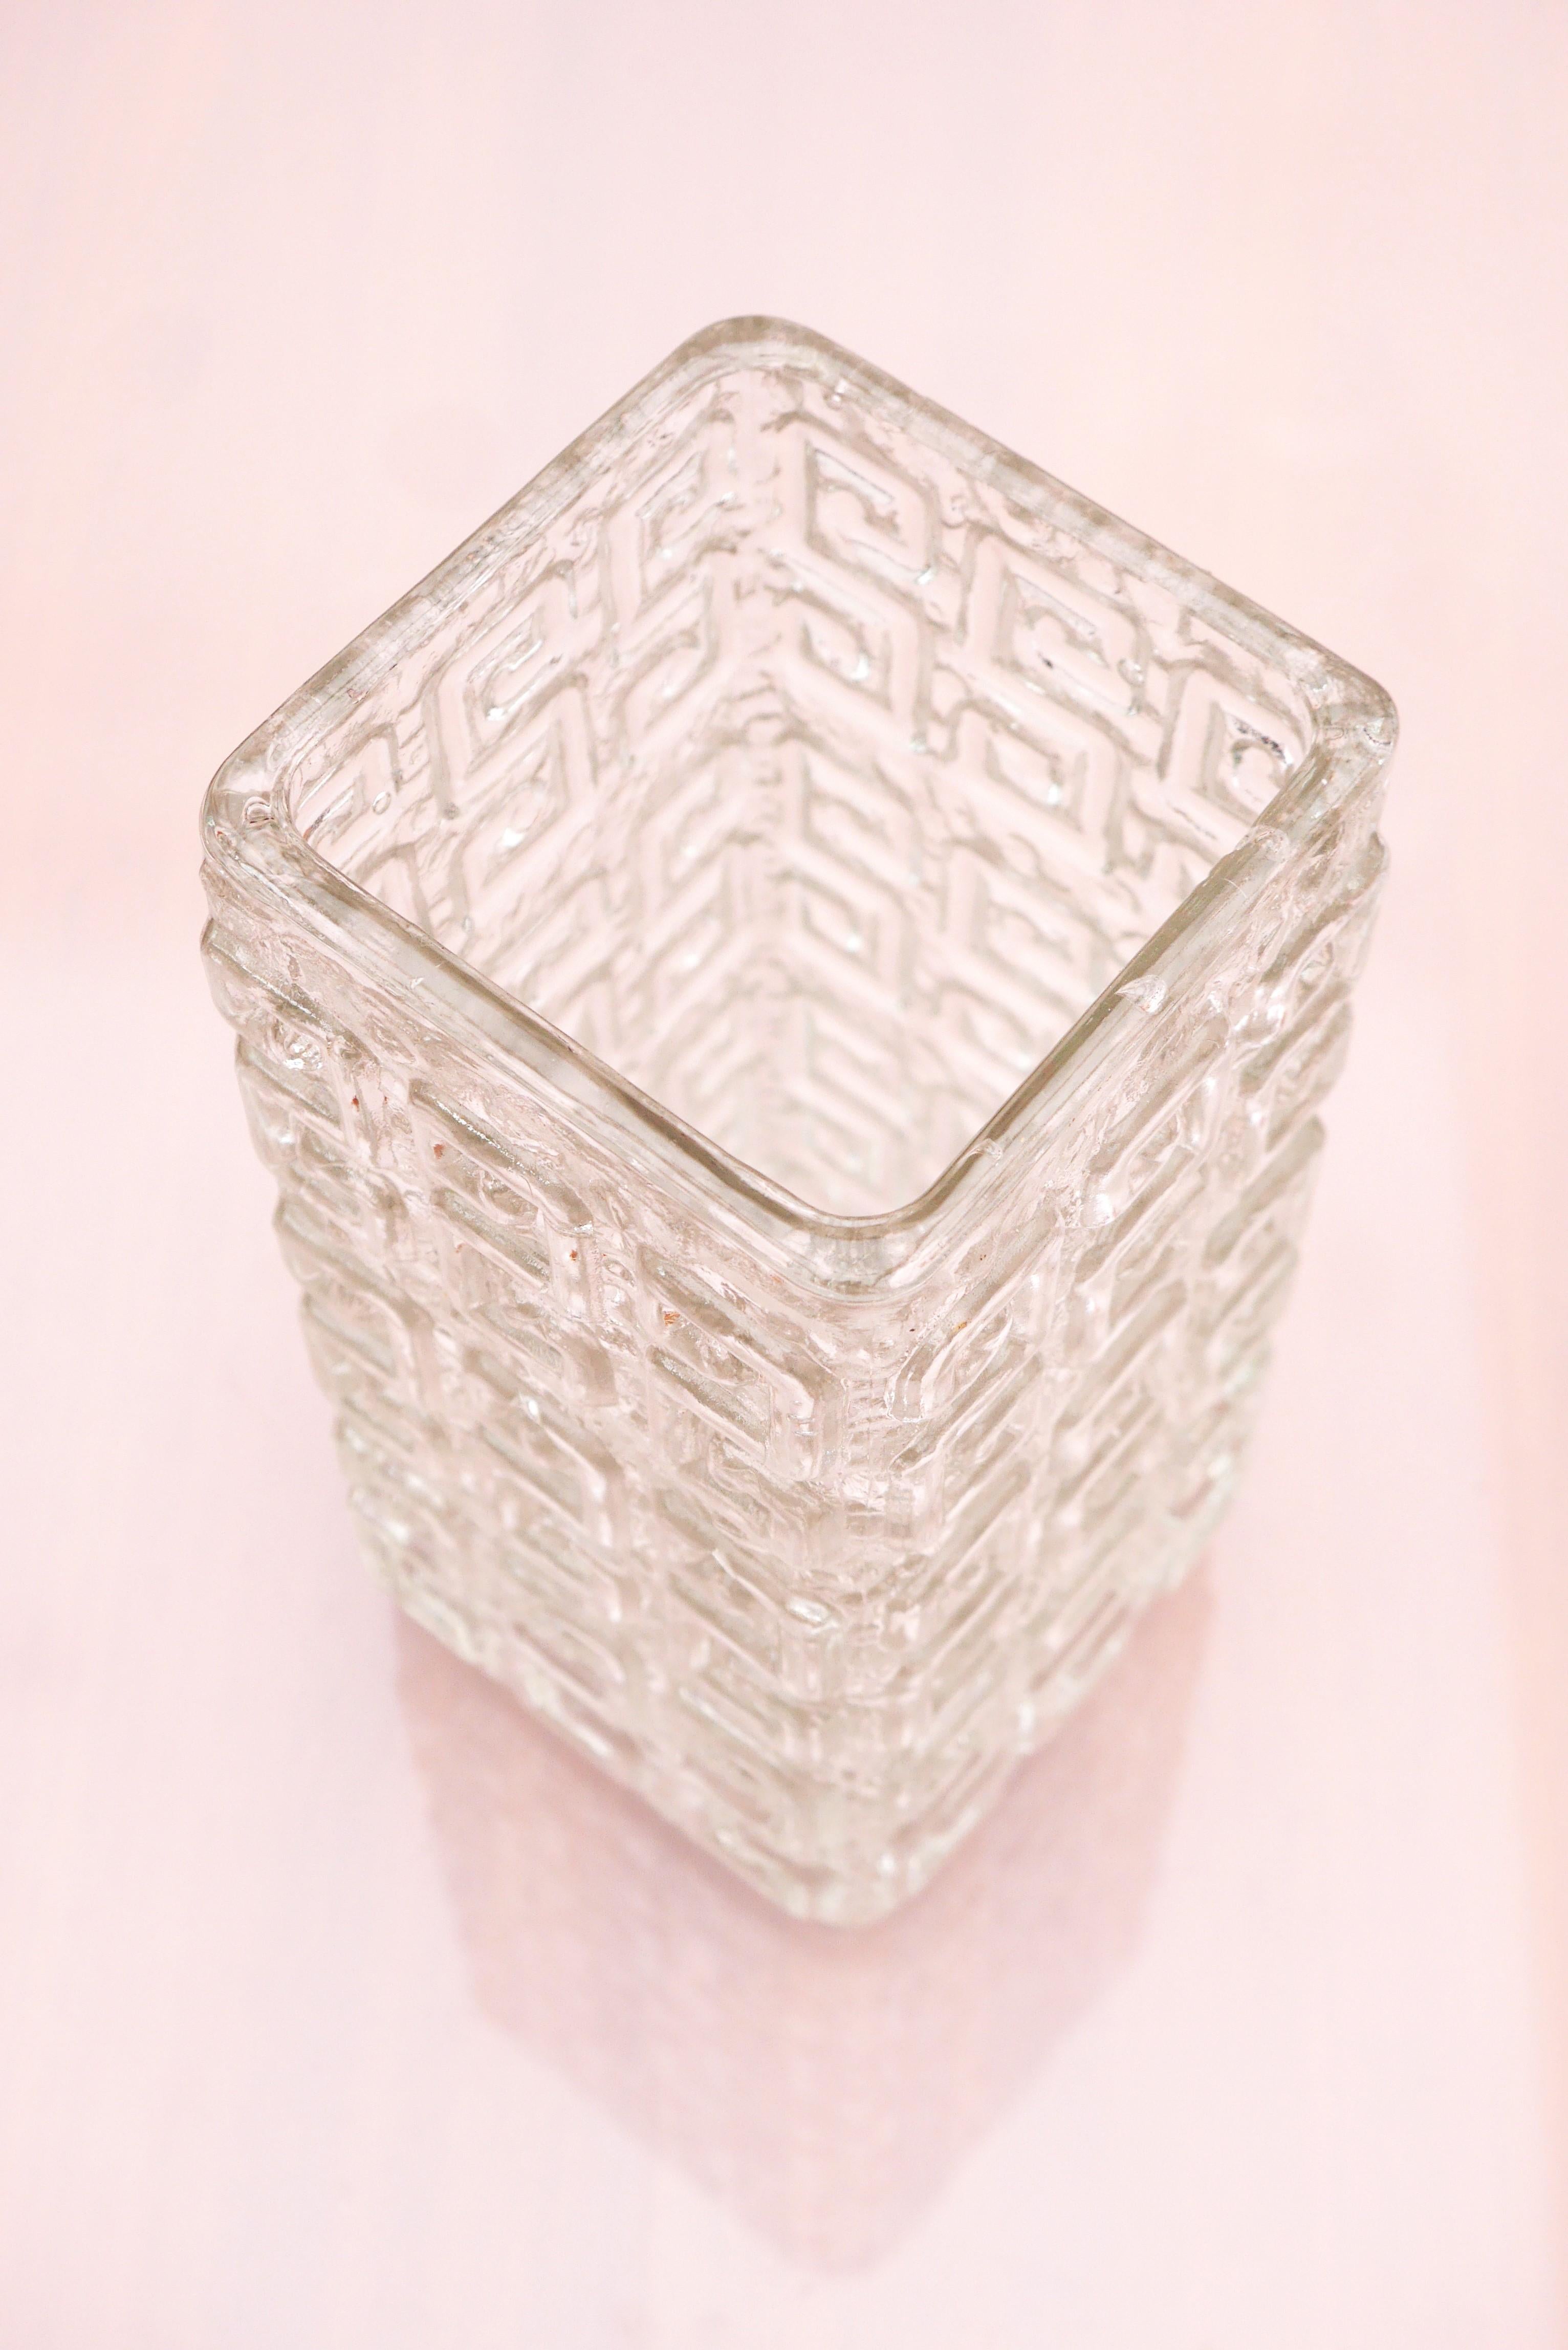 Hand-Crafted Mid-century modern crystal vase from Riihimäen lasi made by Tamara Aladin For Sale